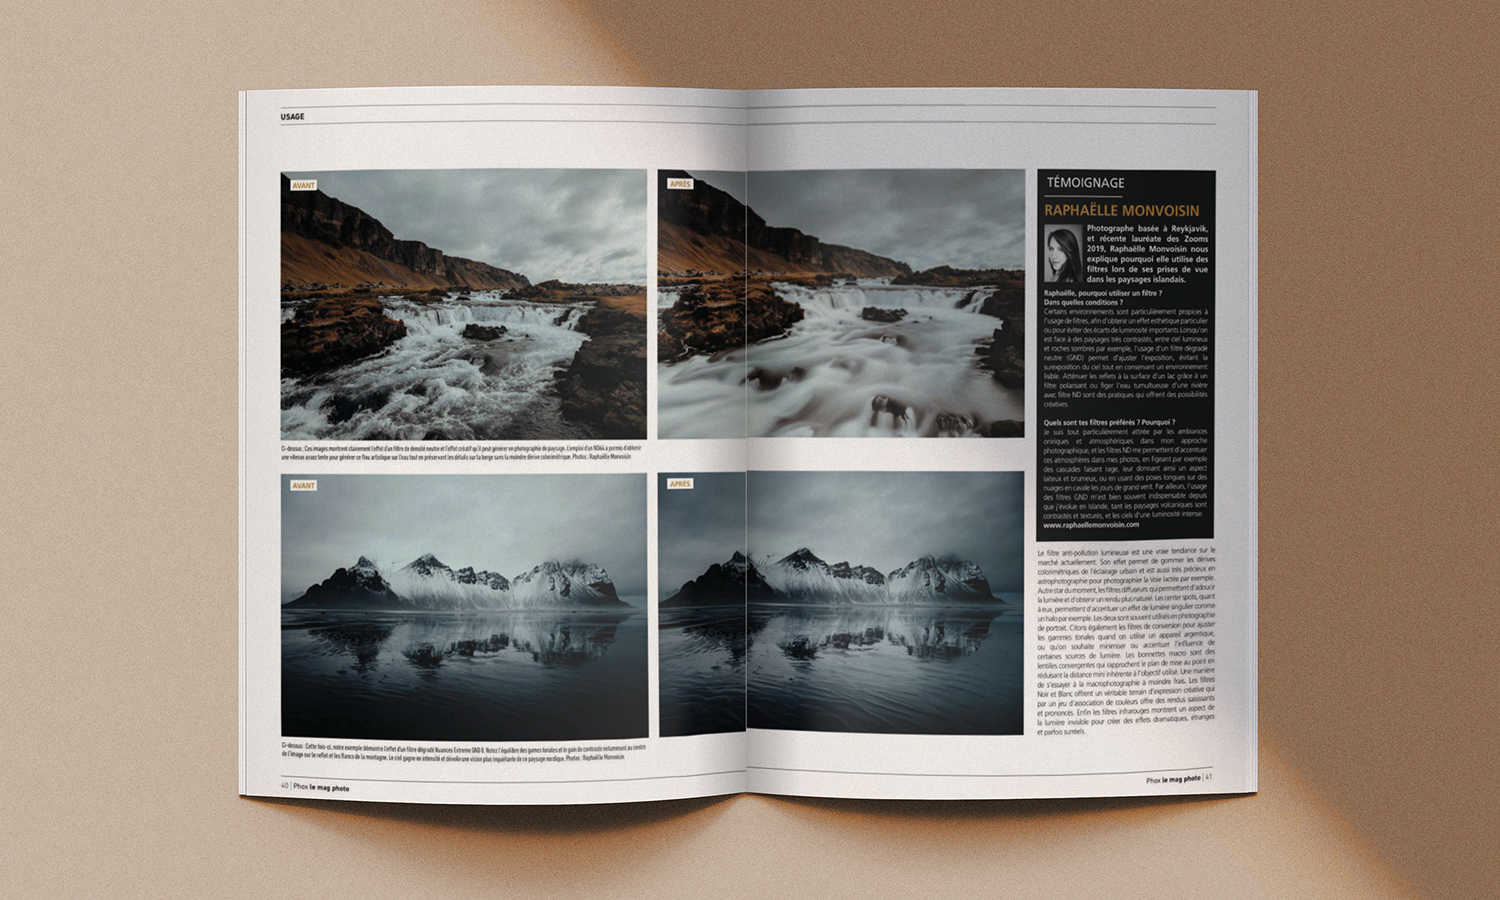 Cokin filters long exposure publication featured Phox photo